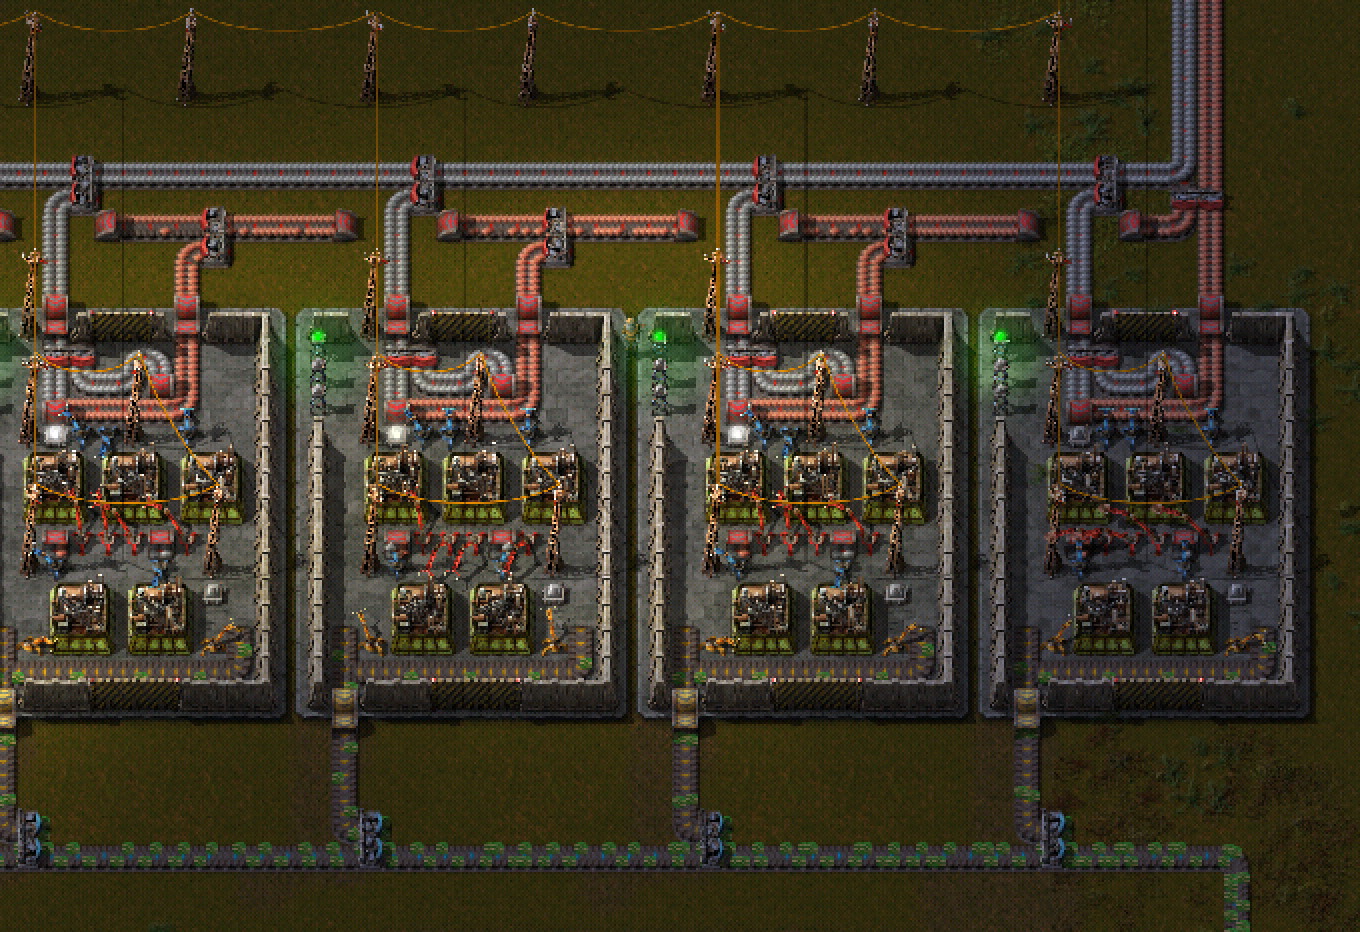 A number of cloned basic-circuit production. Every production-site is surrounded by a fence (here a wall) to prevent accidental changes. The underground belts are the INPUT and OUTPUT. The lights at the side symbolize the OPERATION-MODE. All other clones need to be in the same electric network. You see this example is not perfectly synchronized: The items on the belts are in different positions. Not all lamps are on. This cannot happen, when fully synchronized.